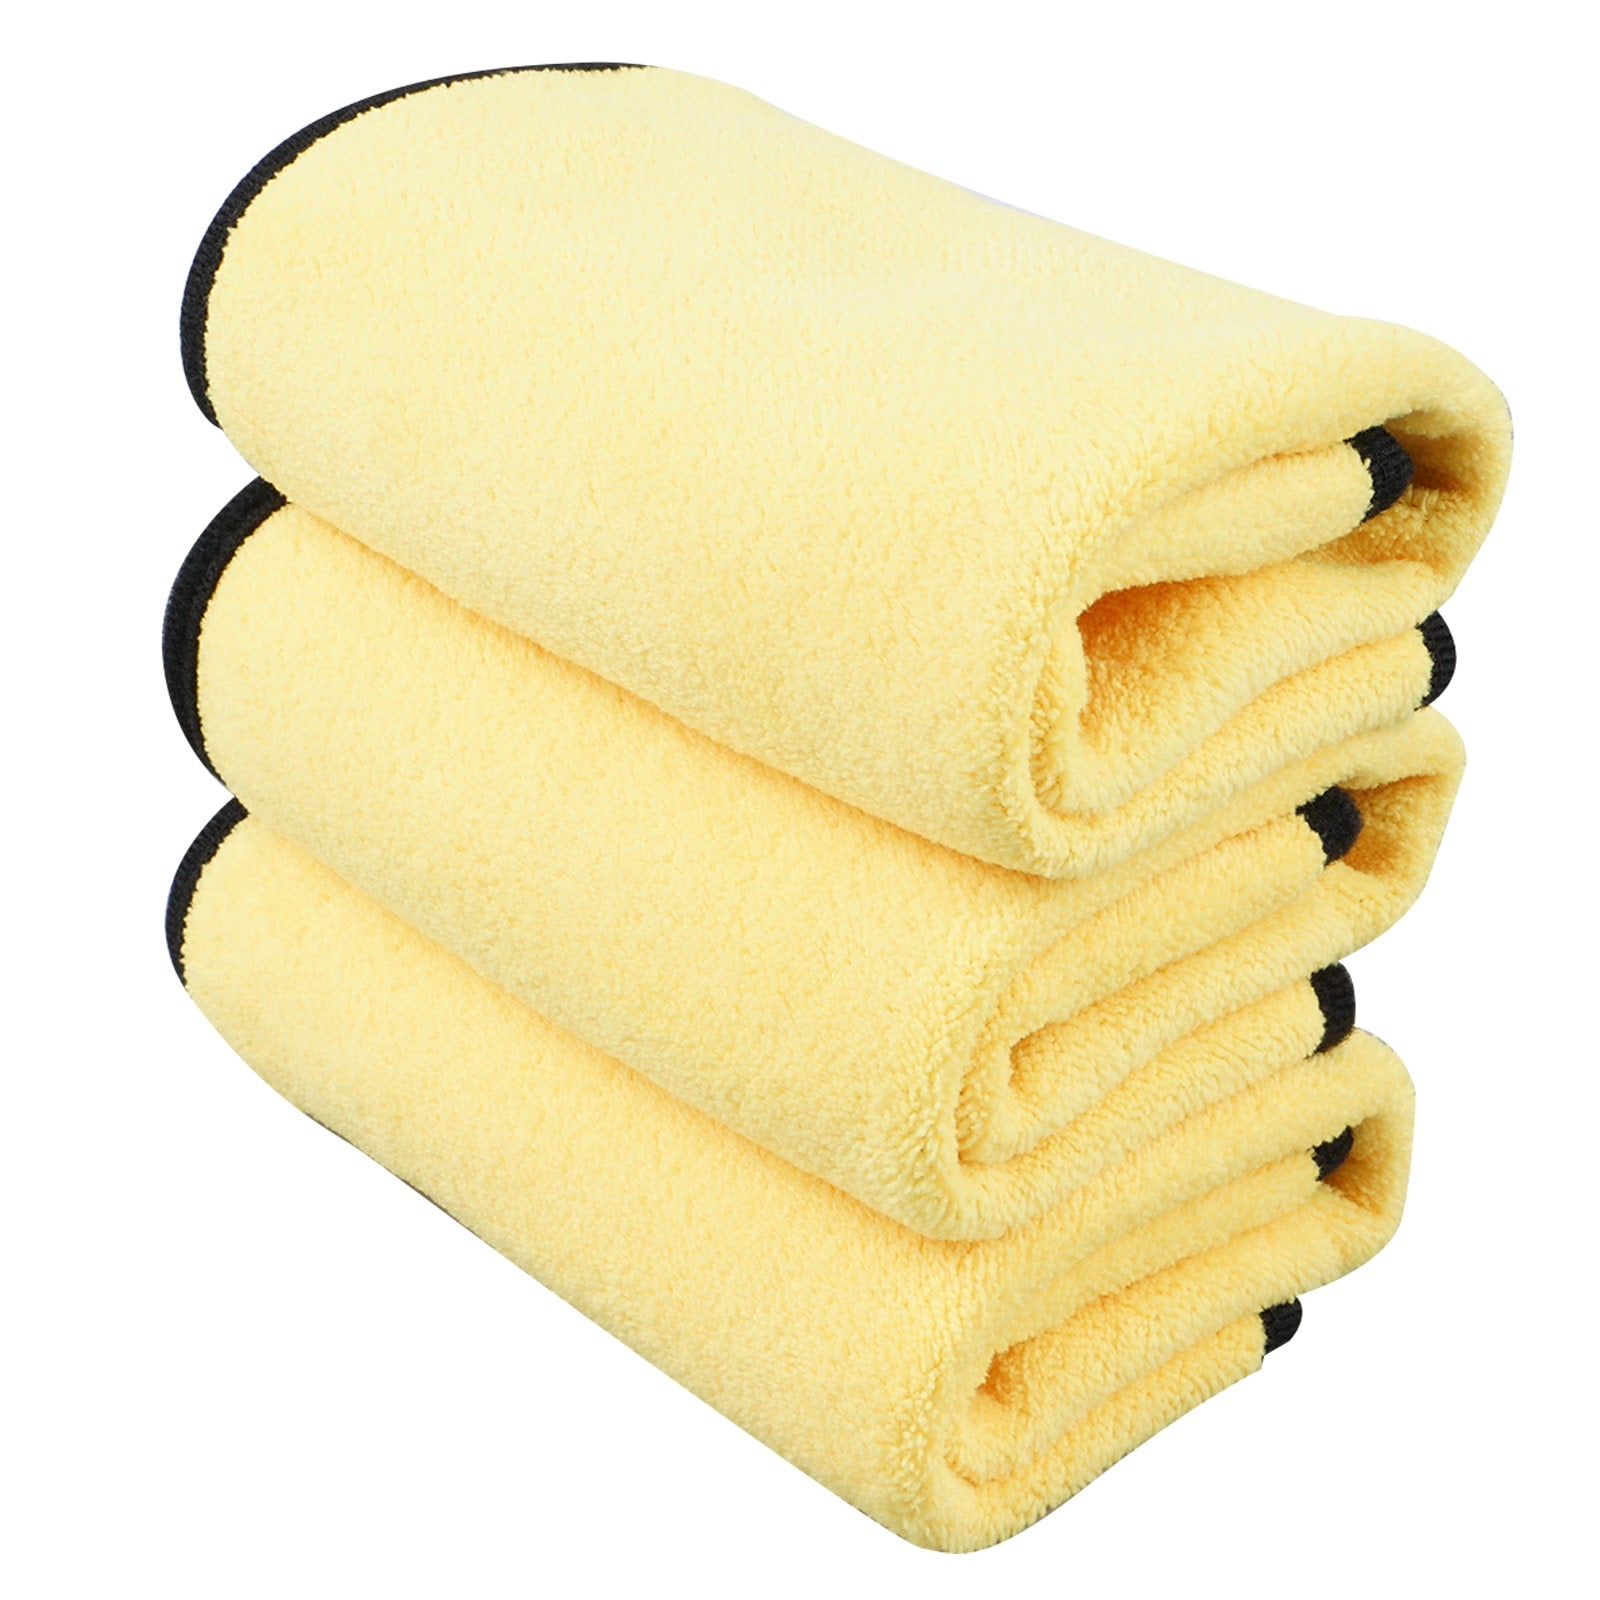 Car Household Window Glass Quick Dry Wash Towels 30*40 / 25*25 cm